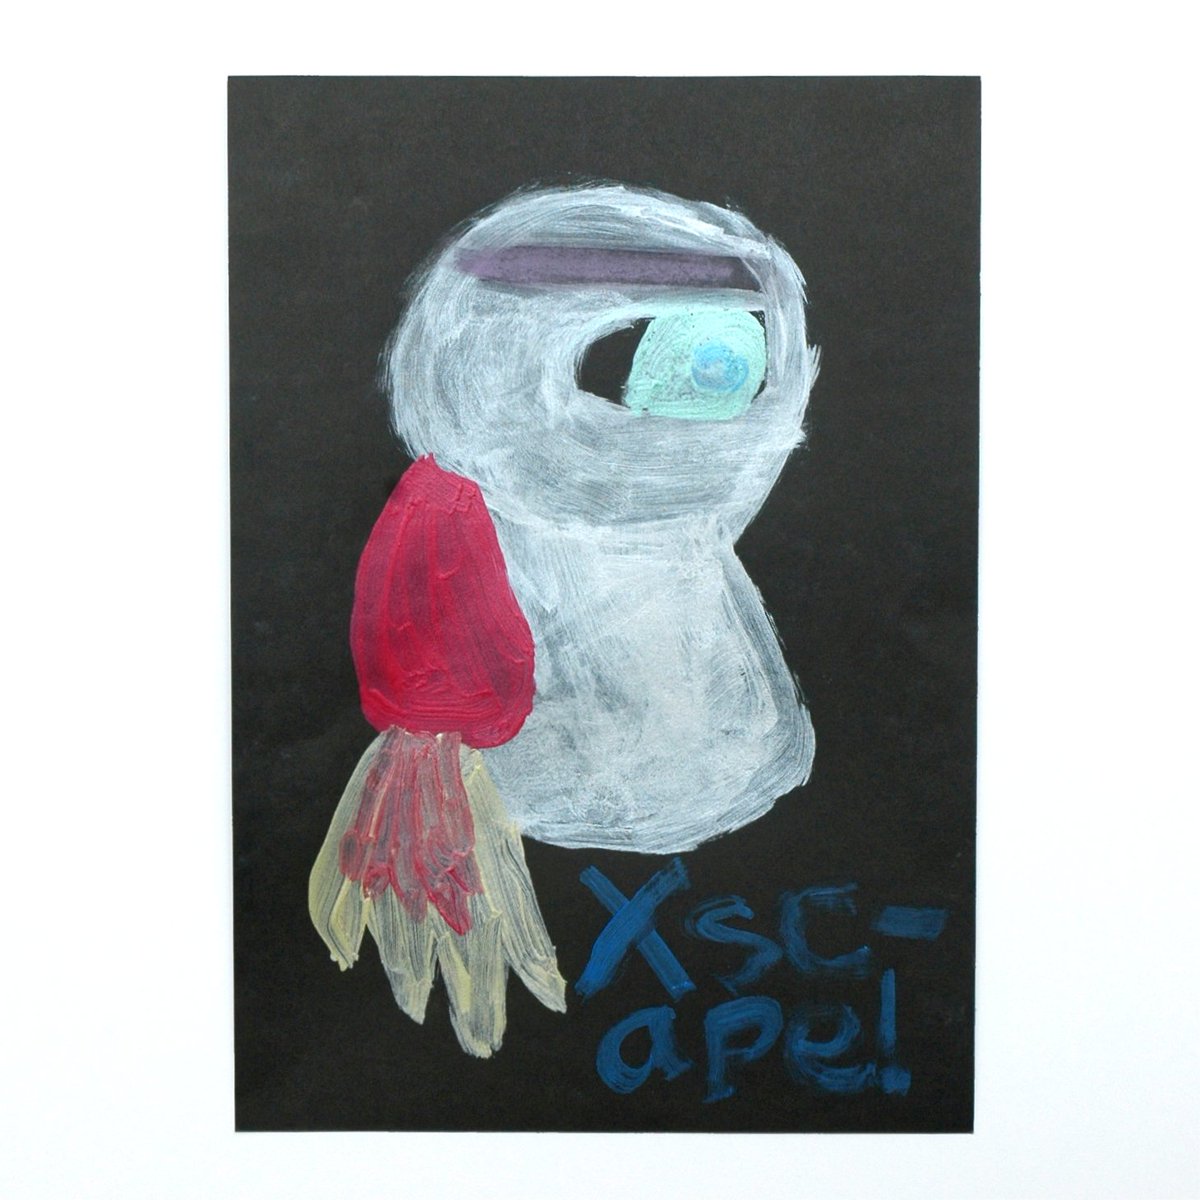 Spaceman Mal from #XScape, drawn by one of our daughters for #fanart Friday. Download XScape from the App Store: itunes.apple.com/gb/app/xscape/… - 
#fanartfriday #fanartfridays #spaceman #videogamecharacters #kidsdrawings #childrensdrawings #videogameart #kidspaintings #childrenspainting